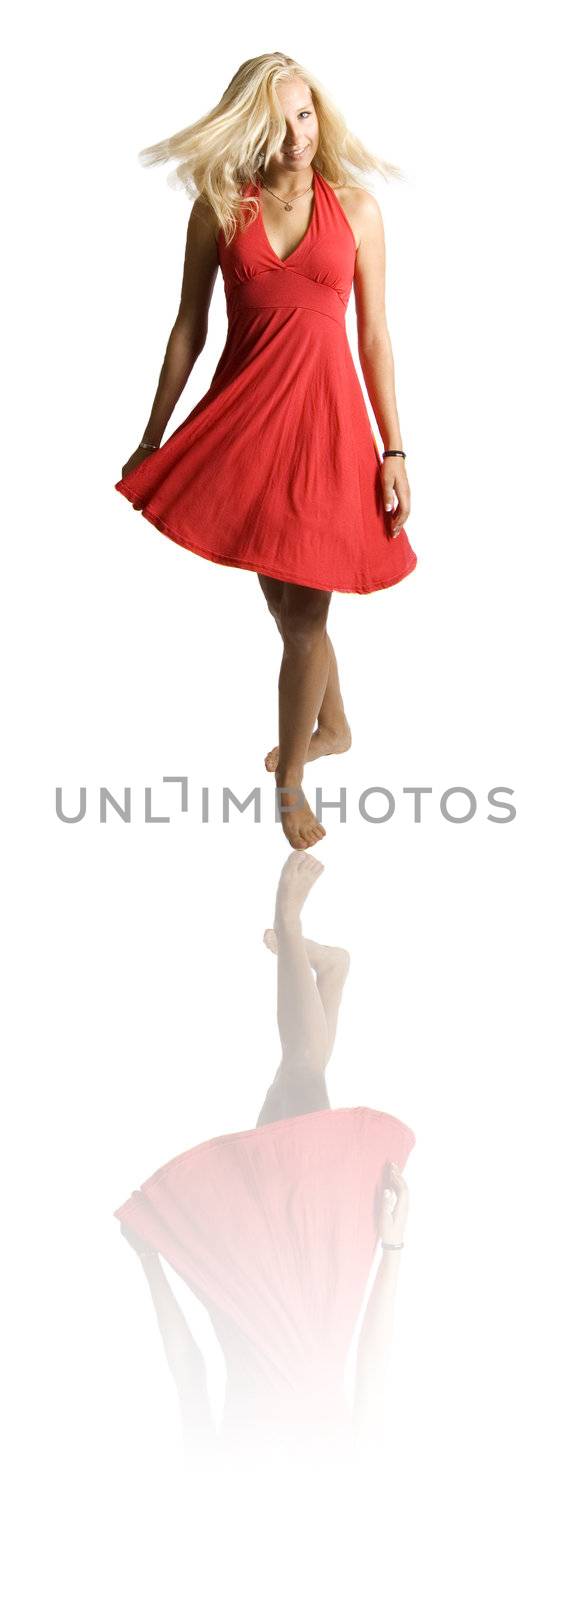 teenage girl is swirling around on a white background